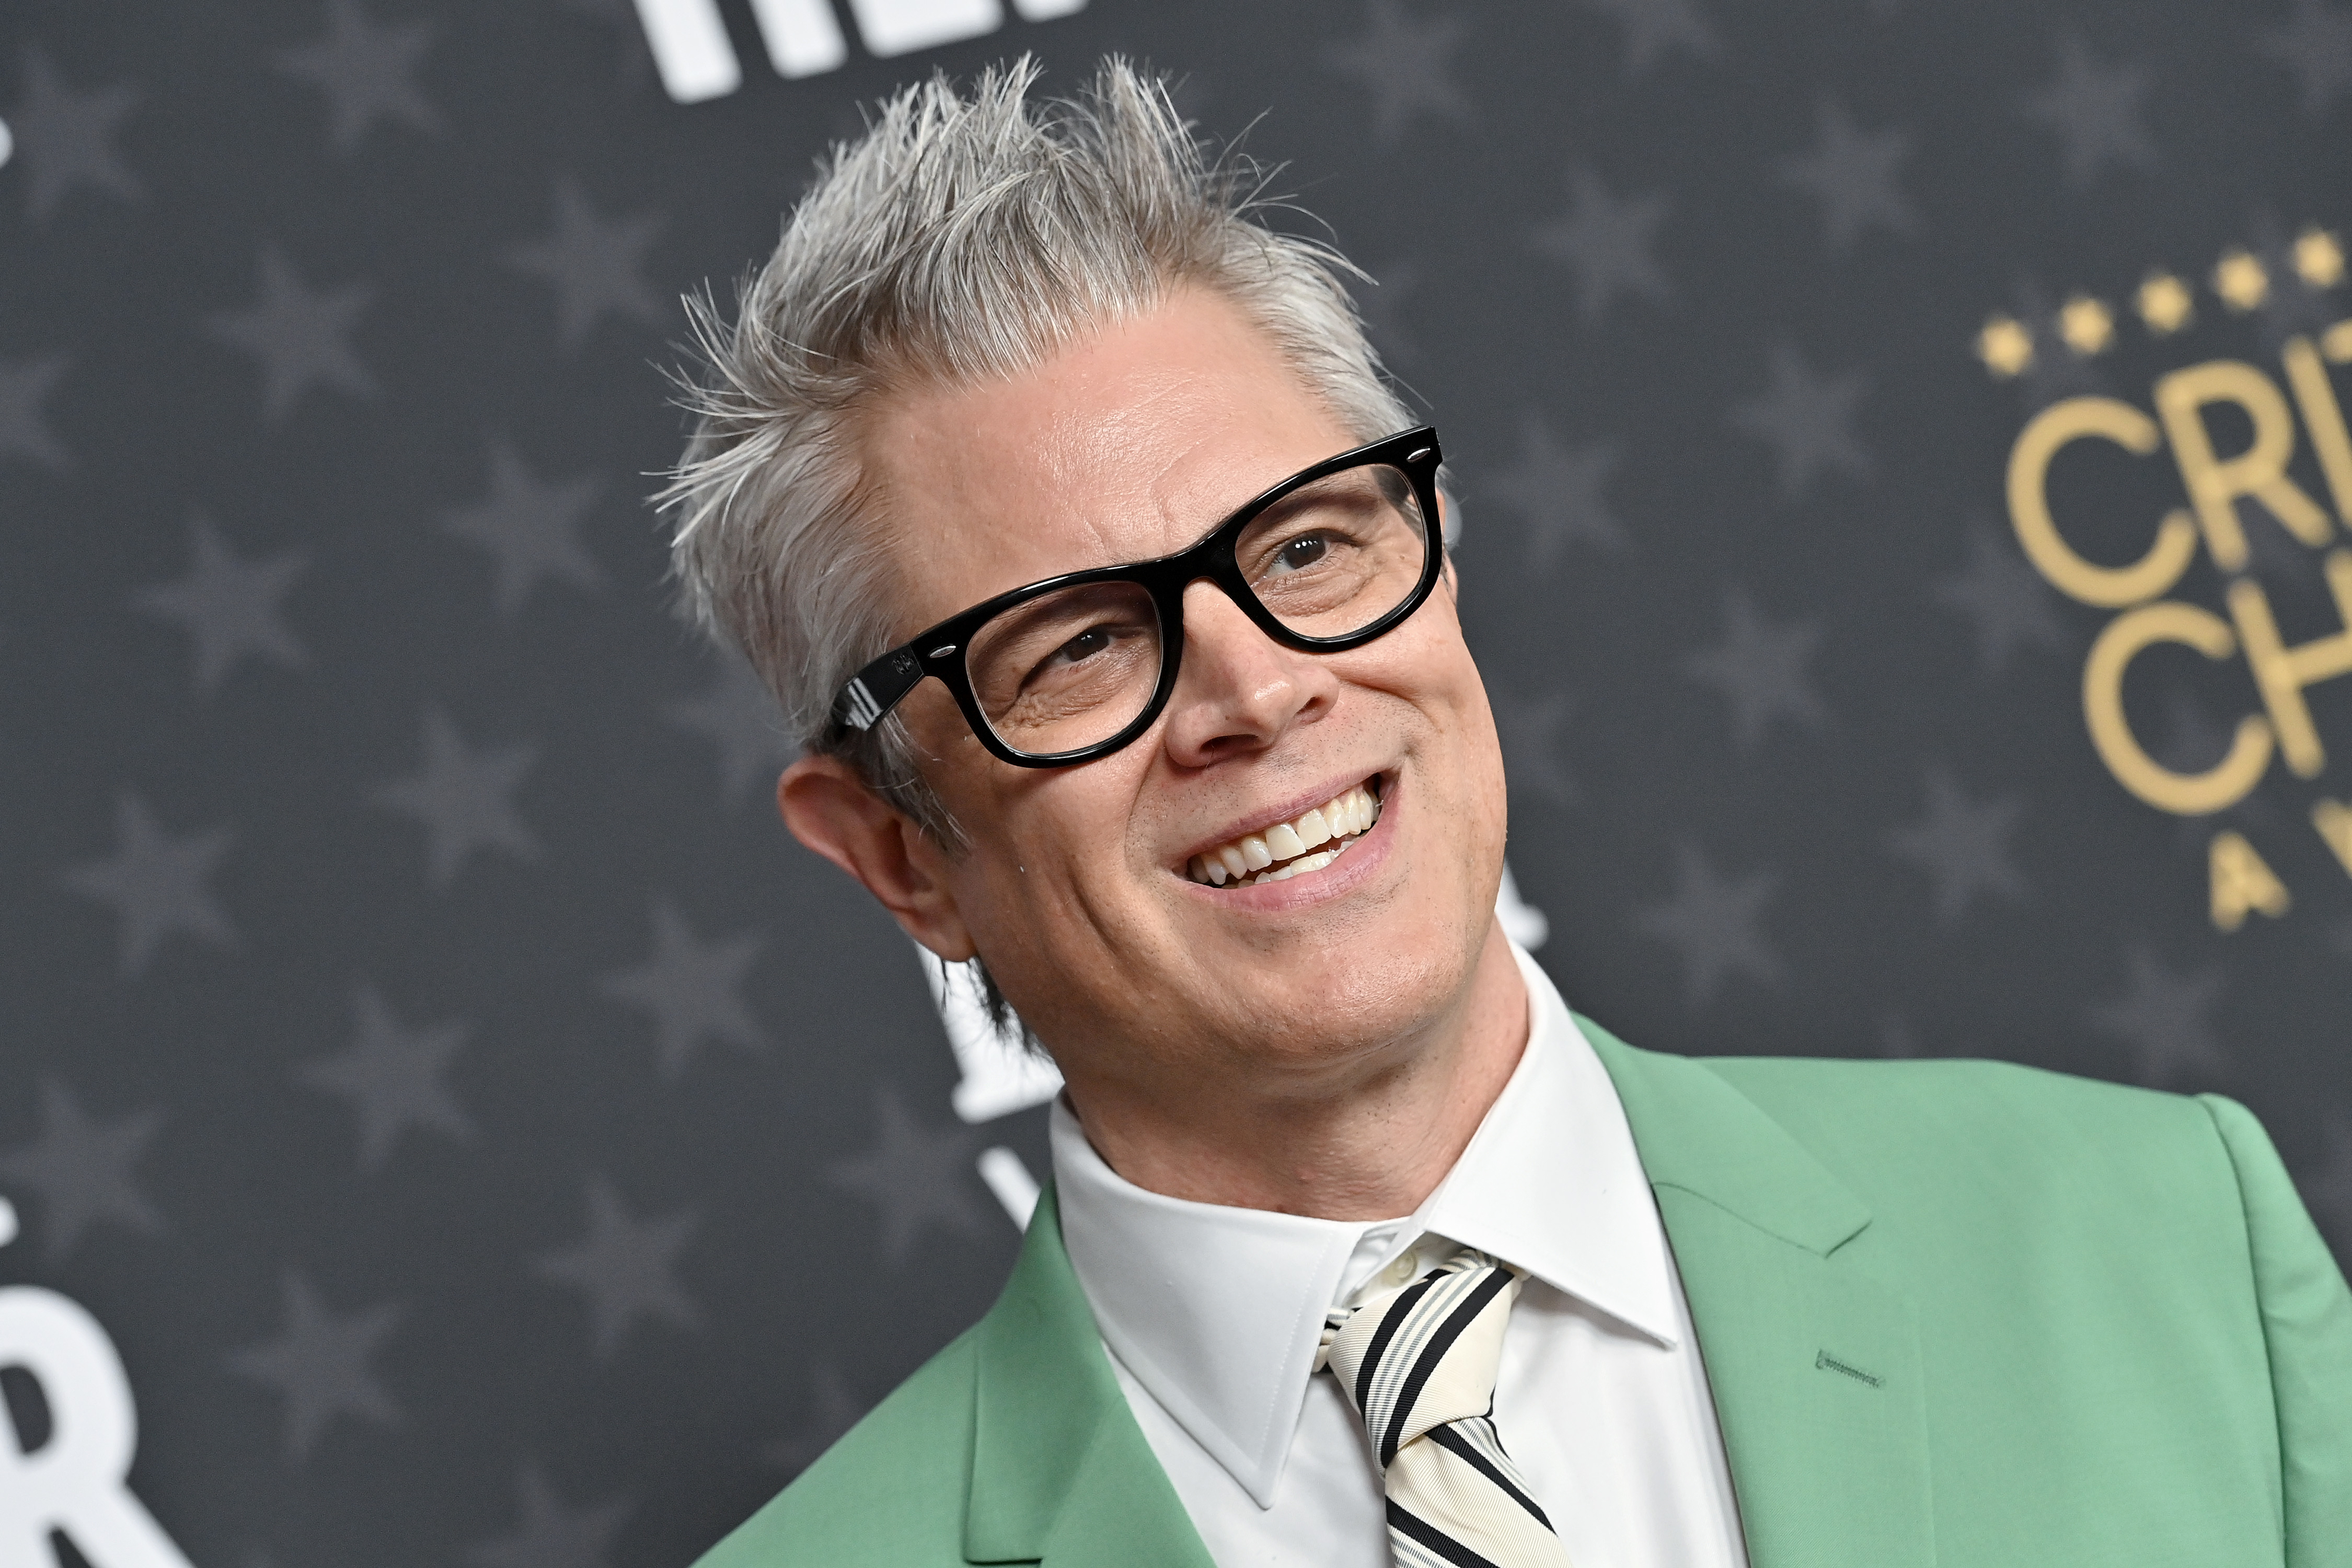 closeup of him smiling at an event wearing a suit and glasses